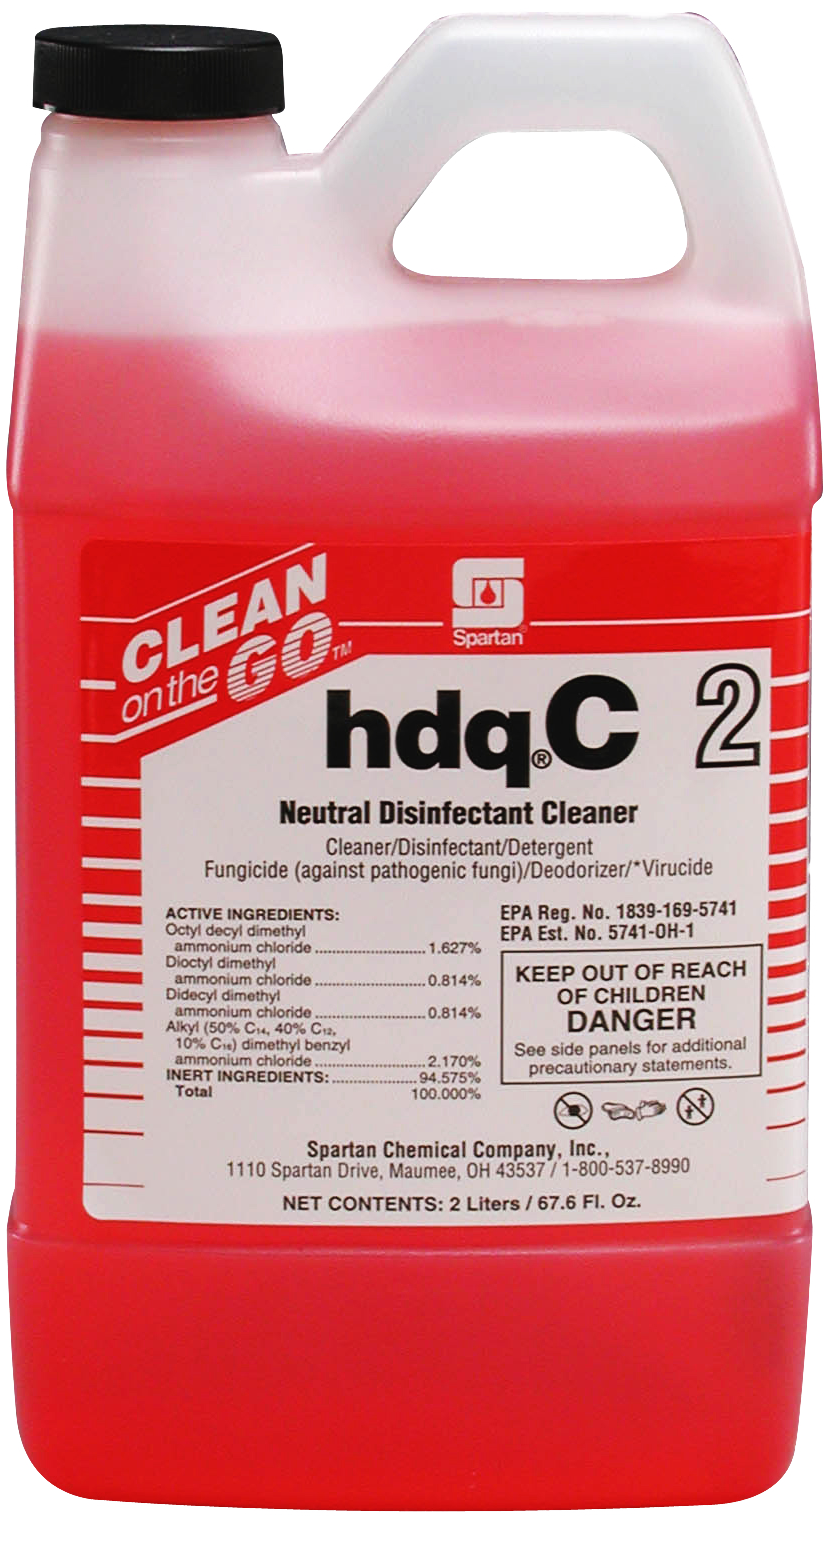 Neutral disinfectant cleaner that is effective against HVB and HCV viruses